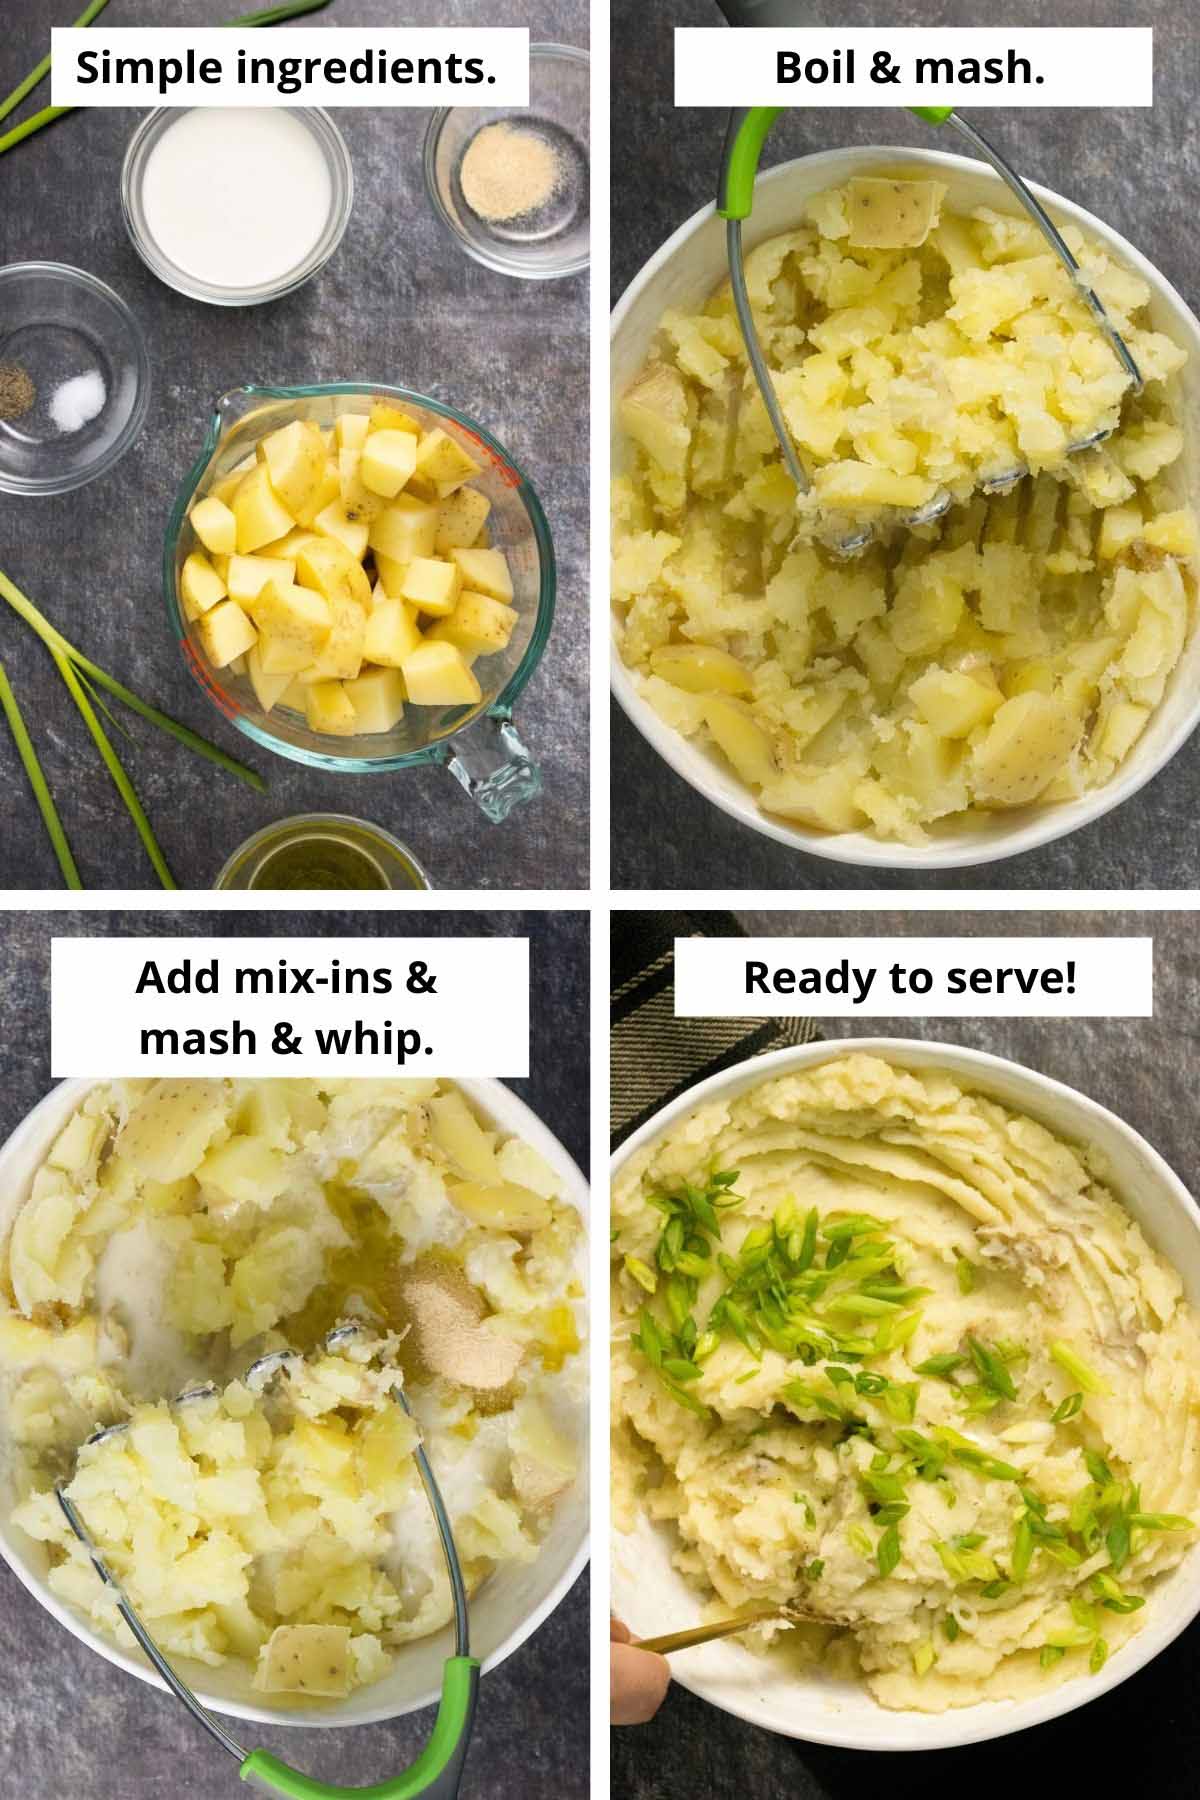 image collage showing diced potatoes, the start of mashing, adding the mix-ins, and the finished olive oil mashed potatoes